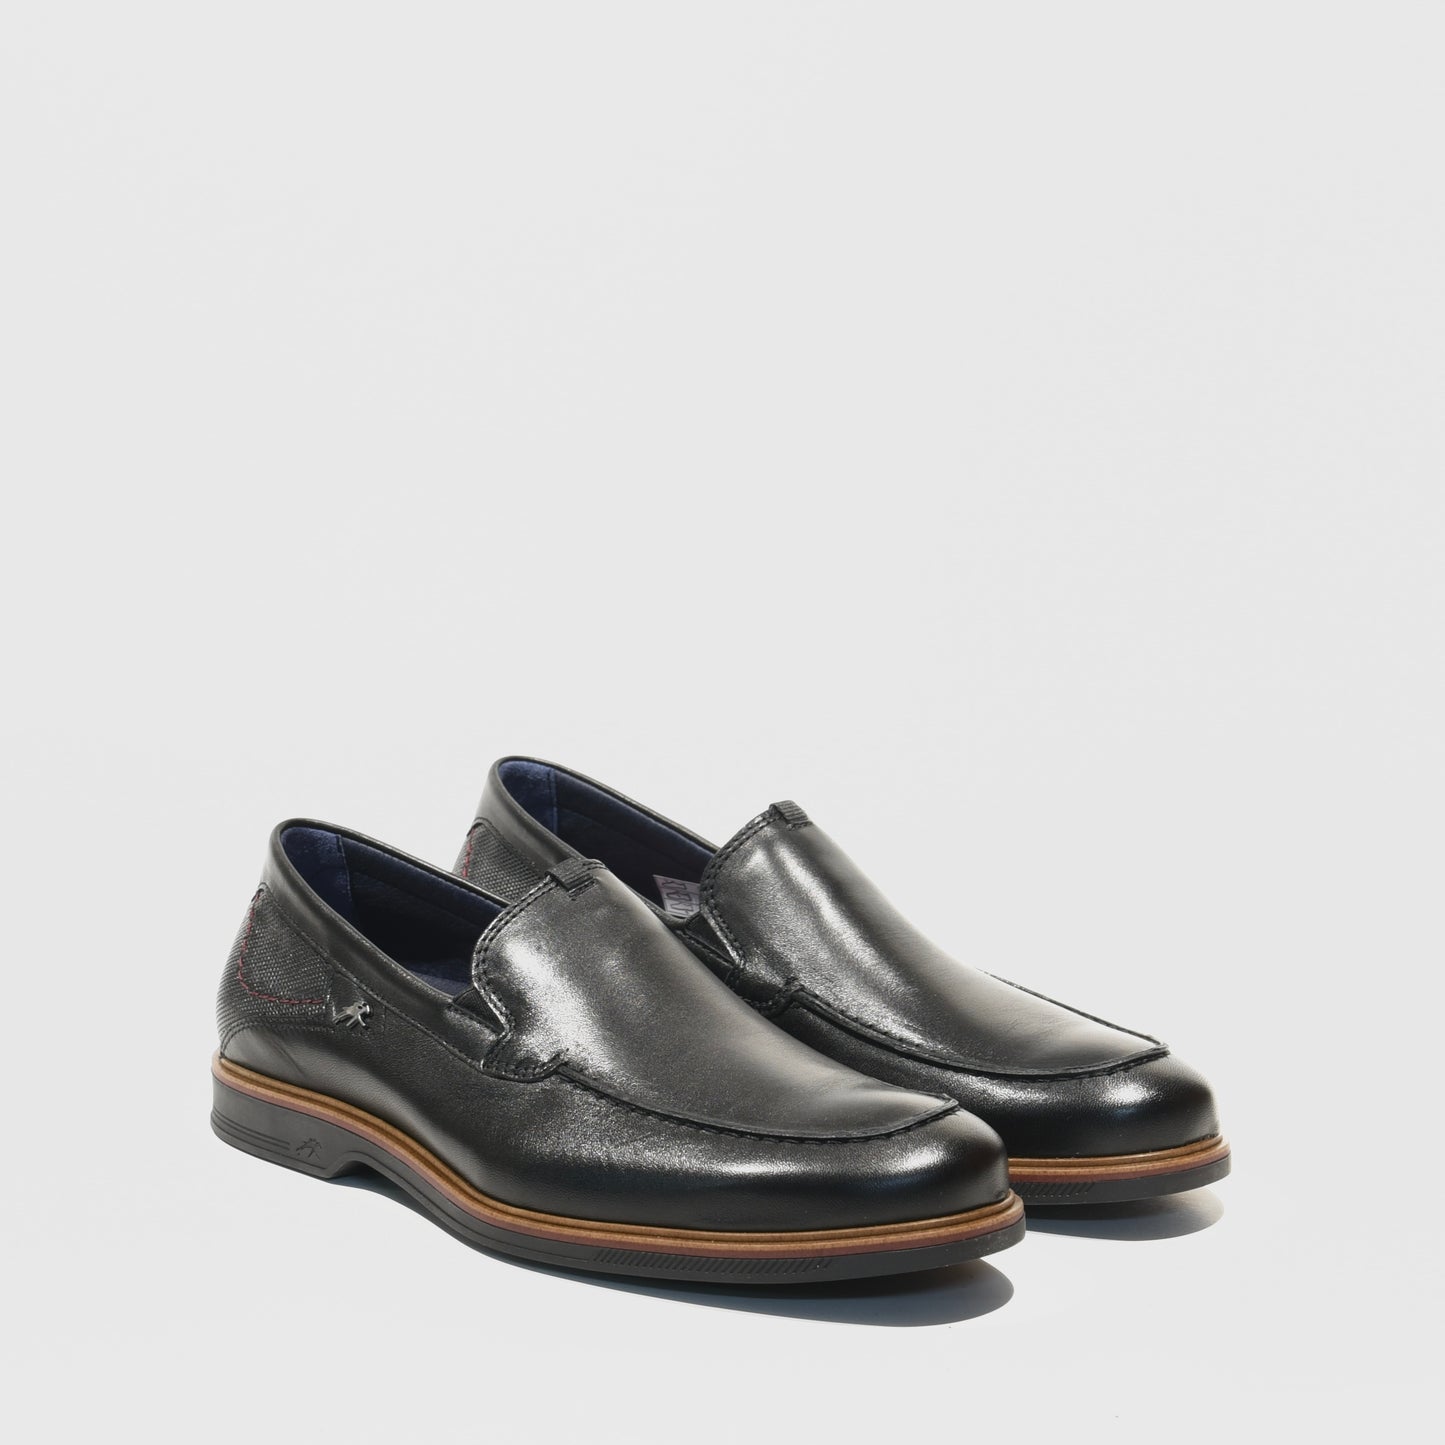 Fluchoes Spanish loafers for men in black